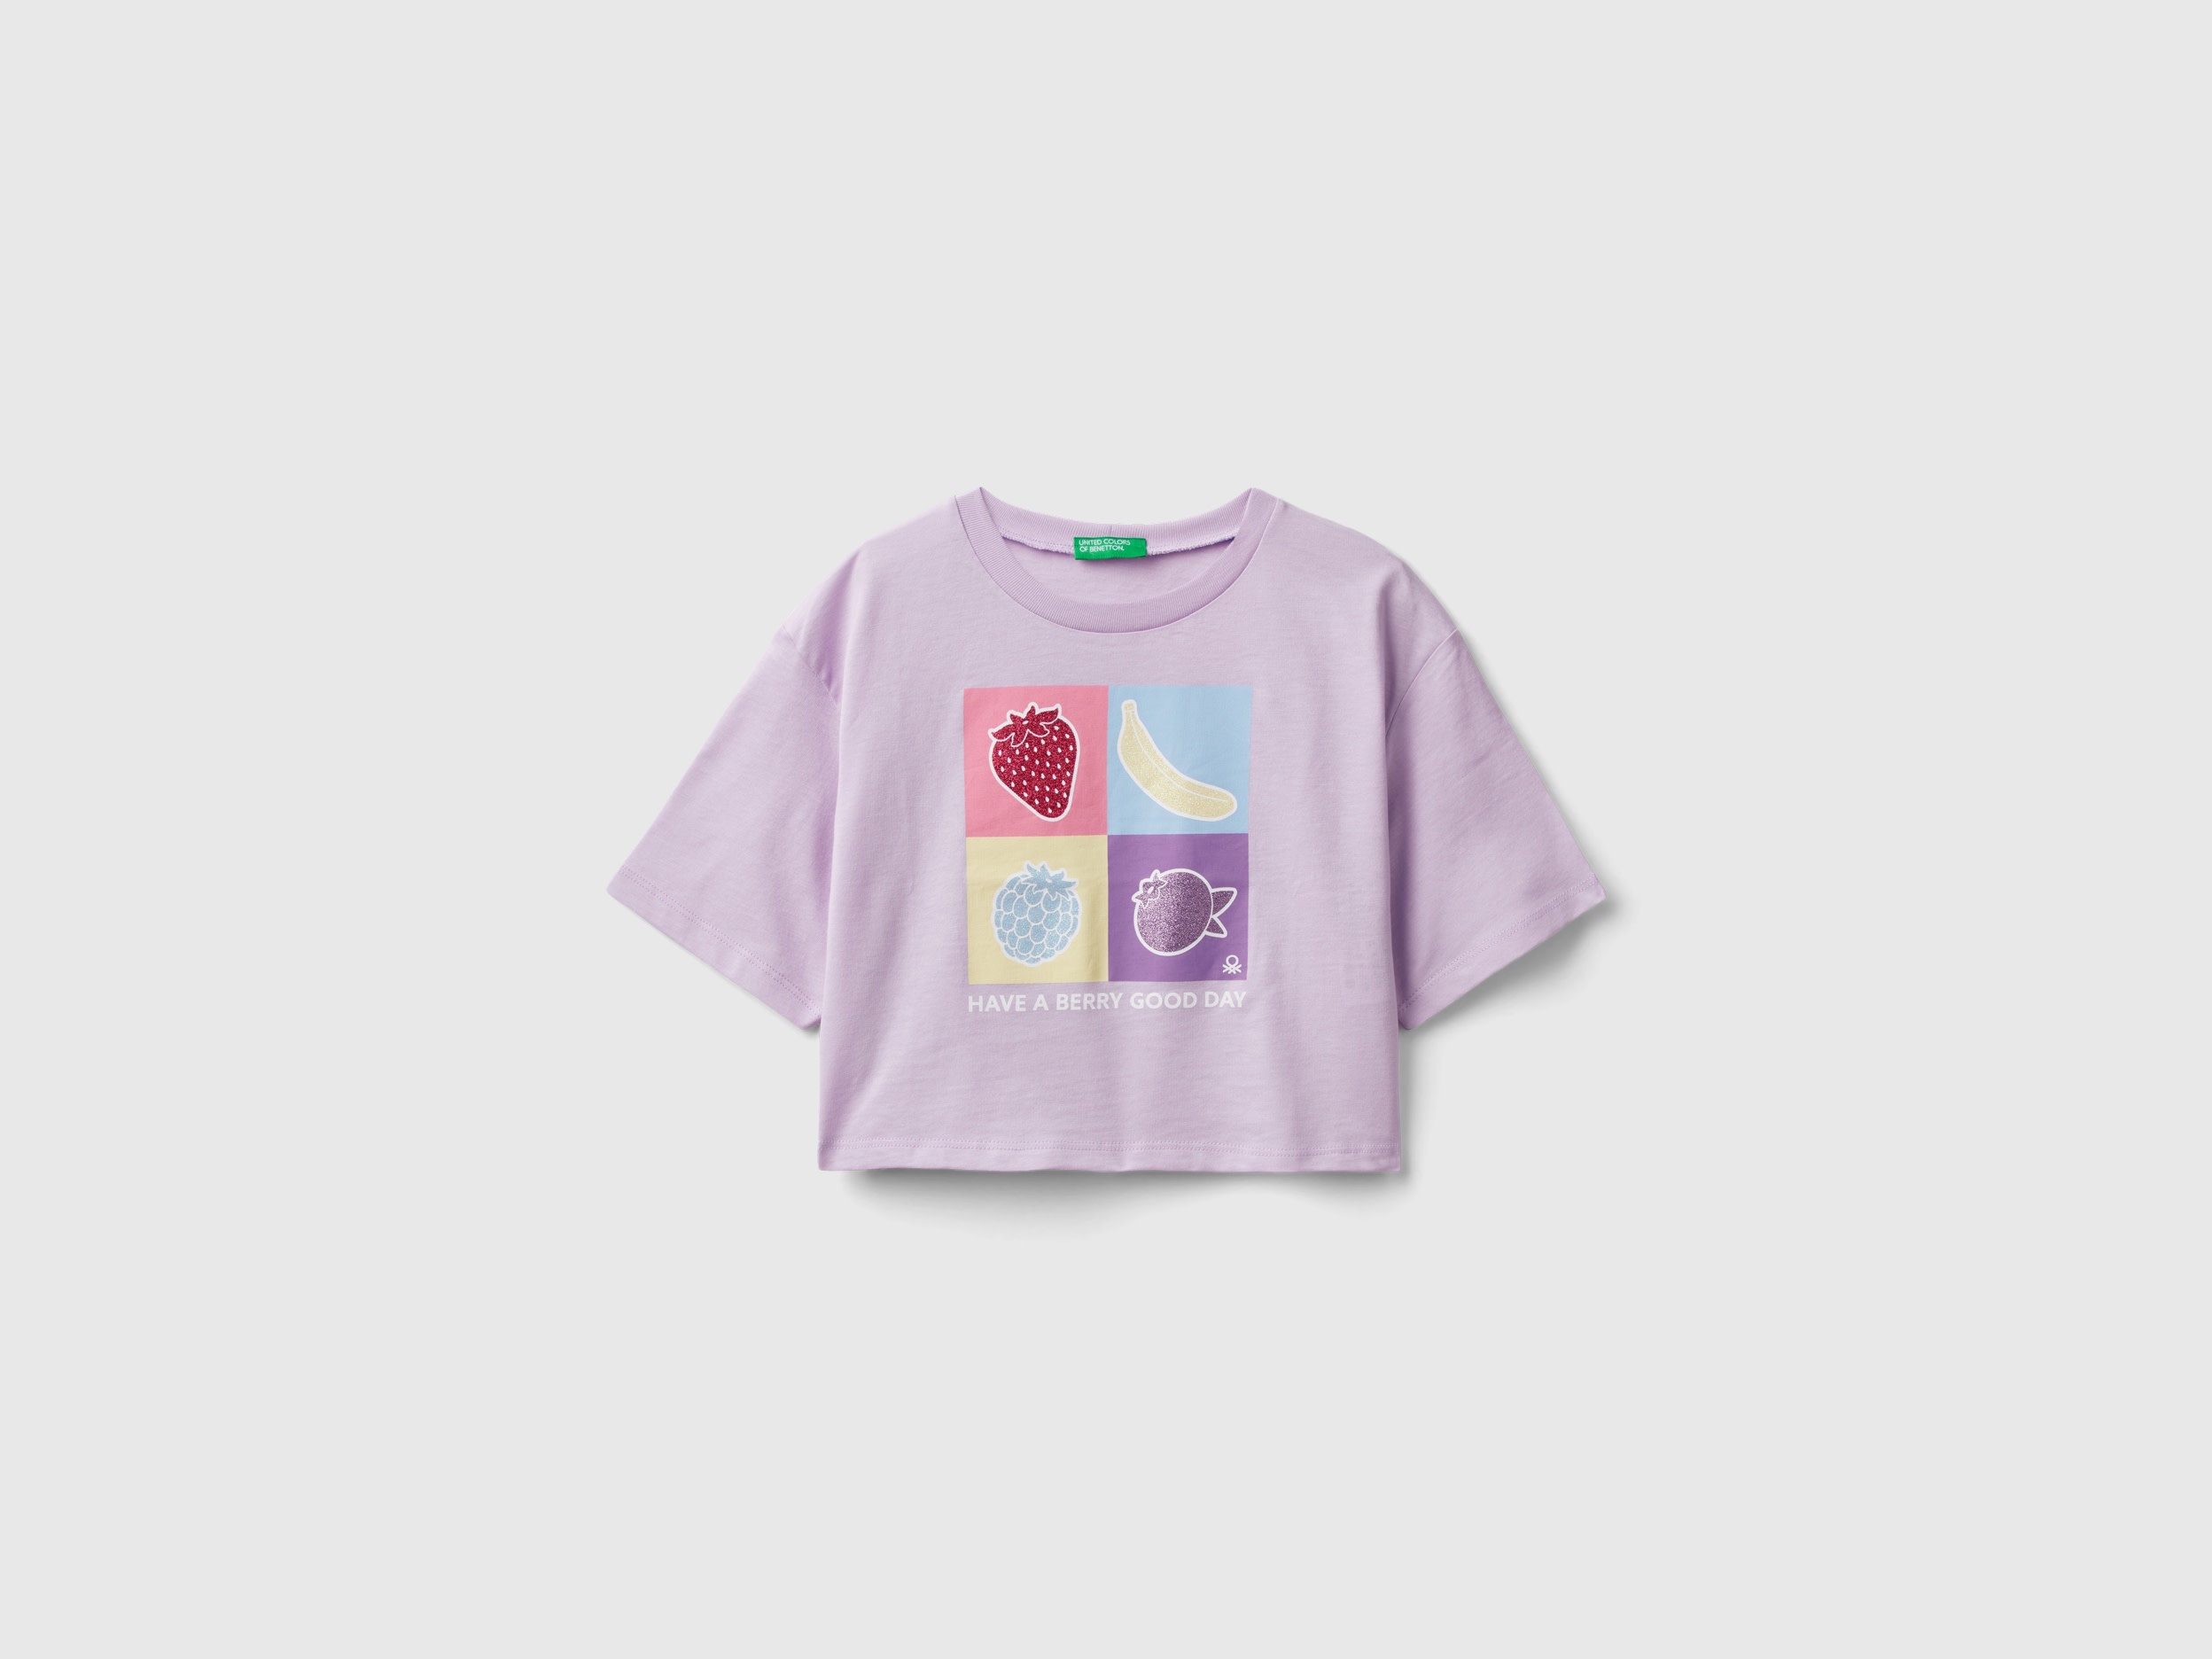 Image of Benetton, T-shirt With Glittery Print, size M, Lilac, Kids